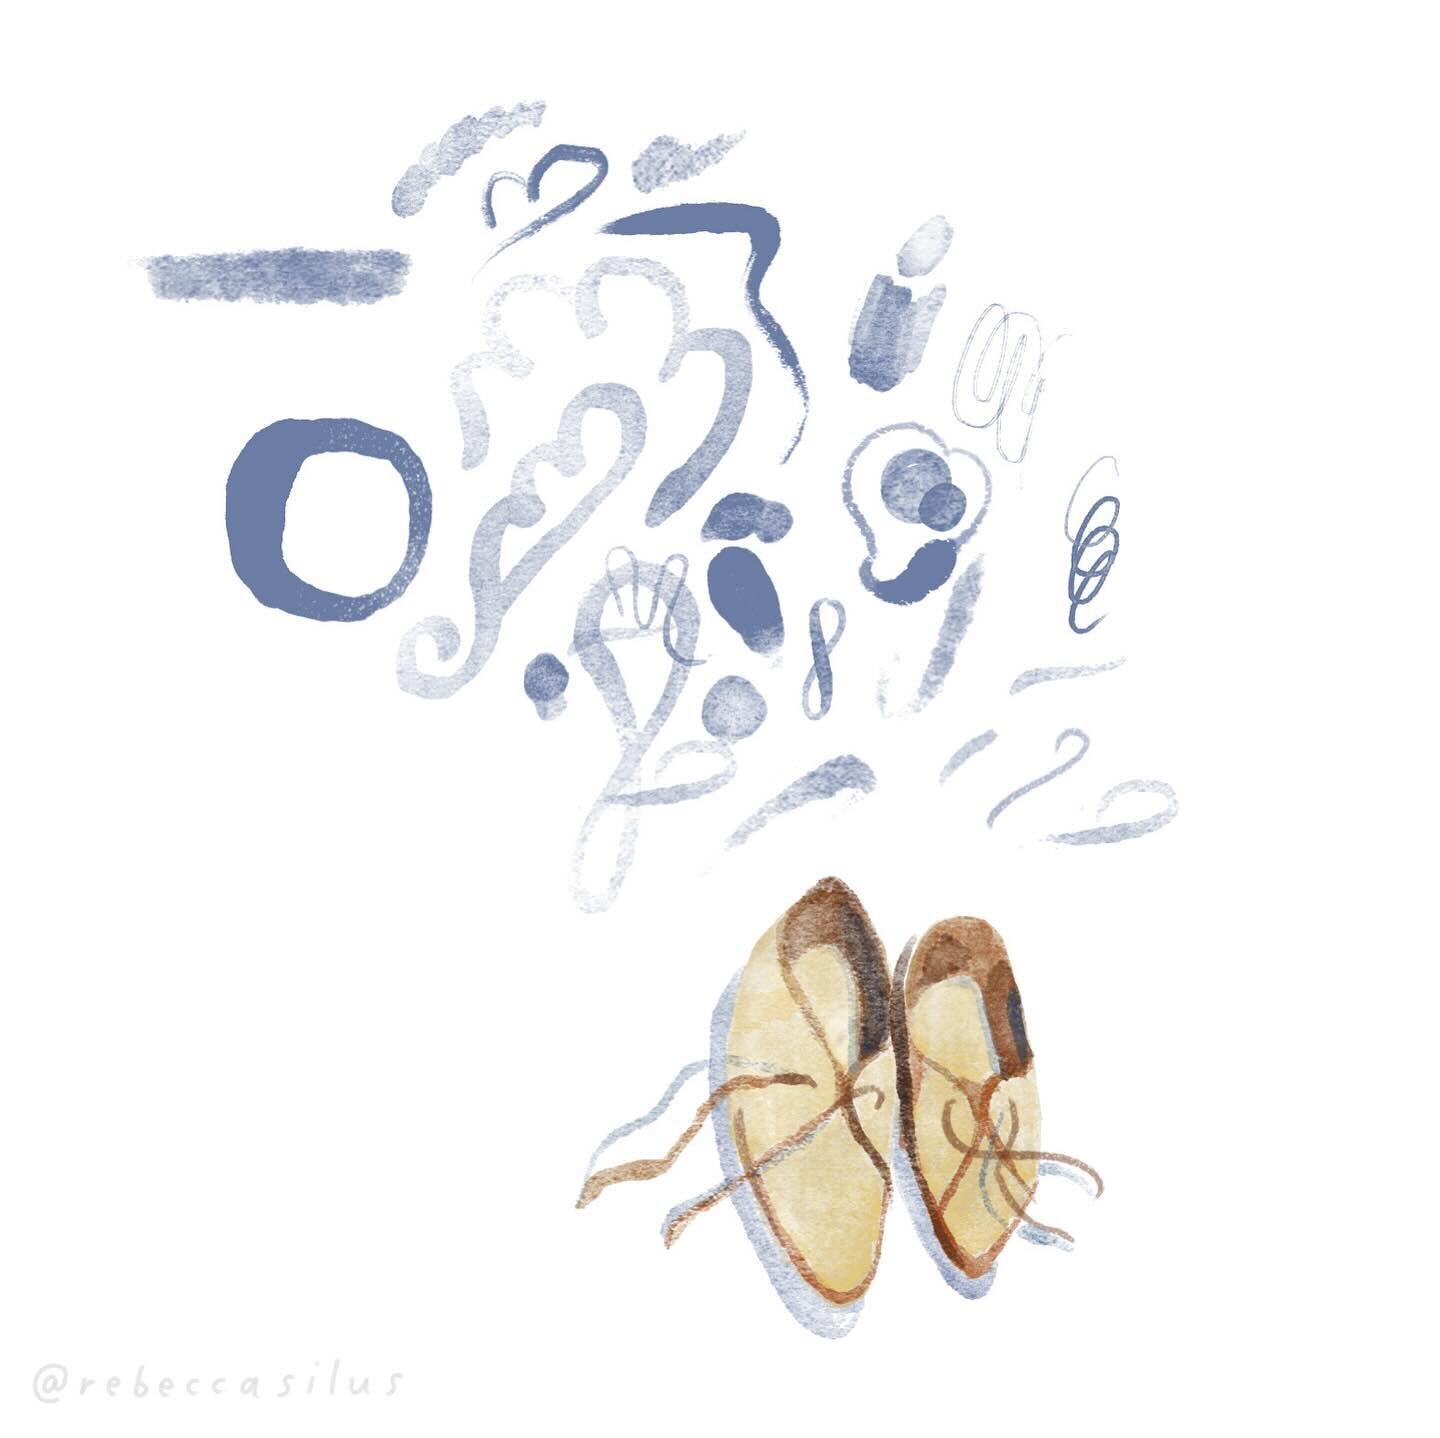 Playing with the Wamazing watercolor brushes in Fresco. They are the closest digital brushes I&rsquo;ve found for recreating how I paint with watercolor. I originally painted the Oxfords years ago&mdash;still have them and wear them!